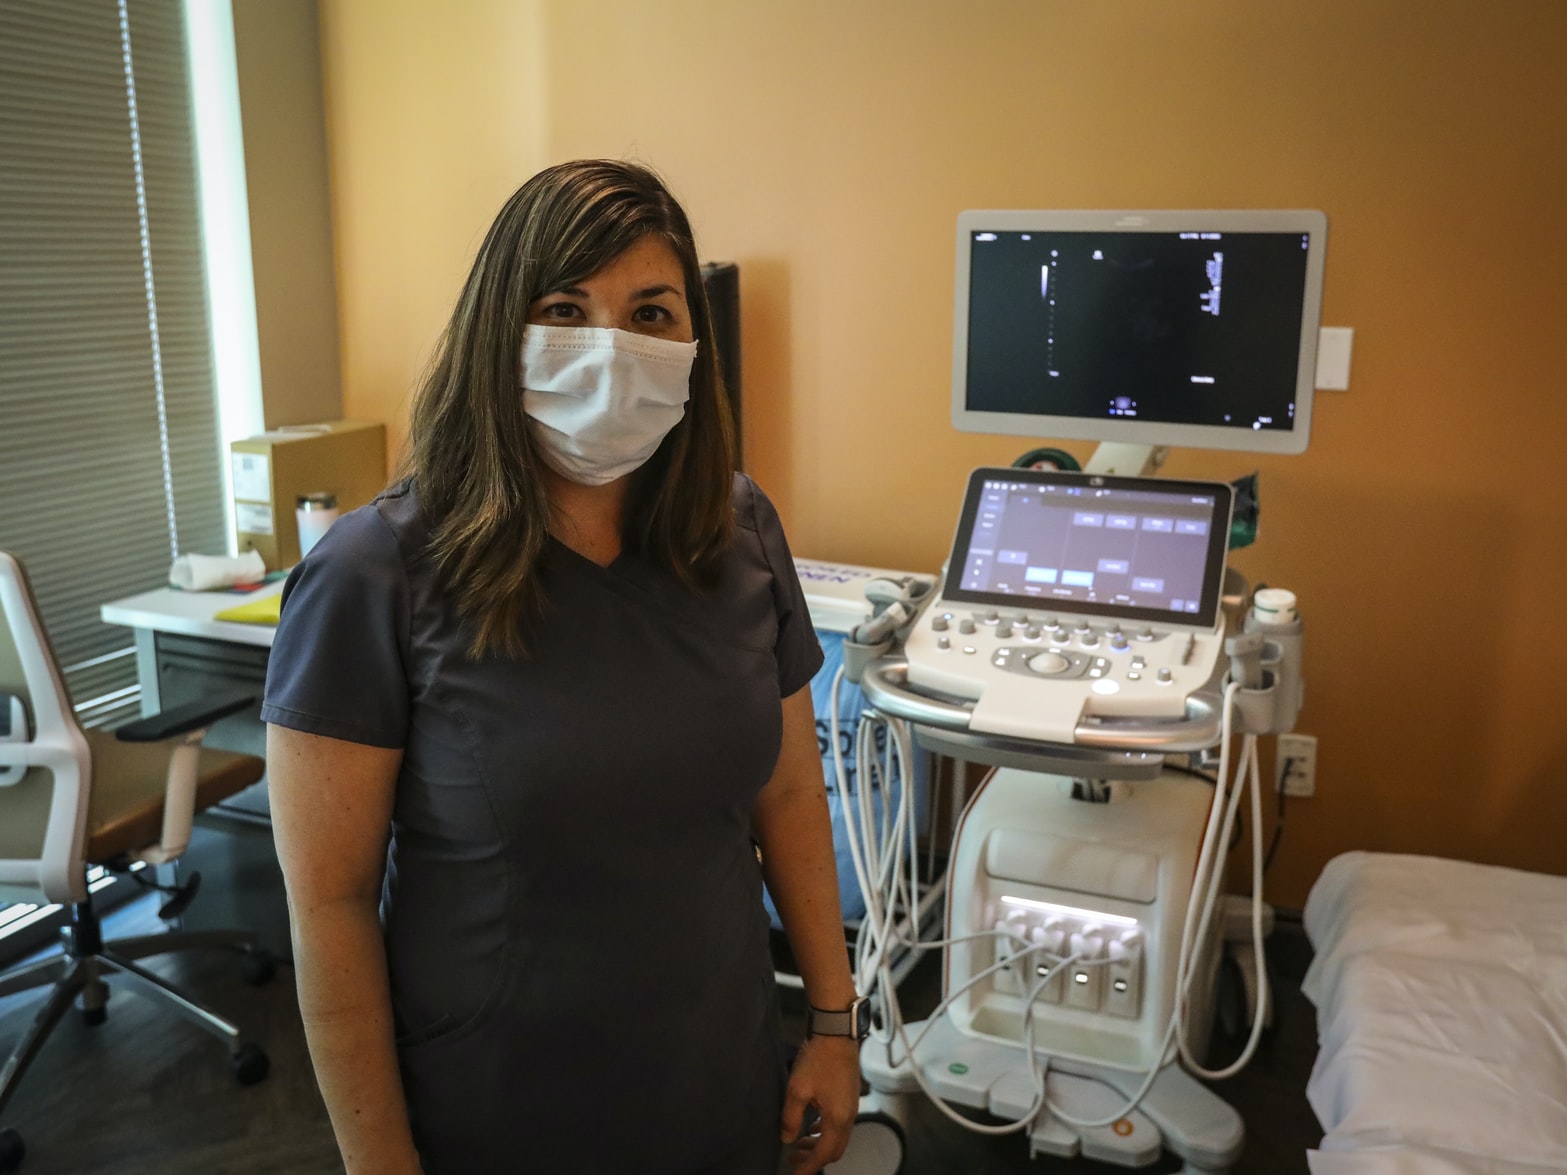 Ultrasound operator standing in front of machine